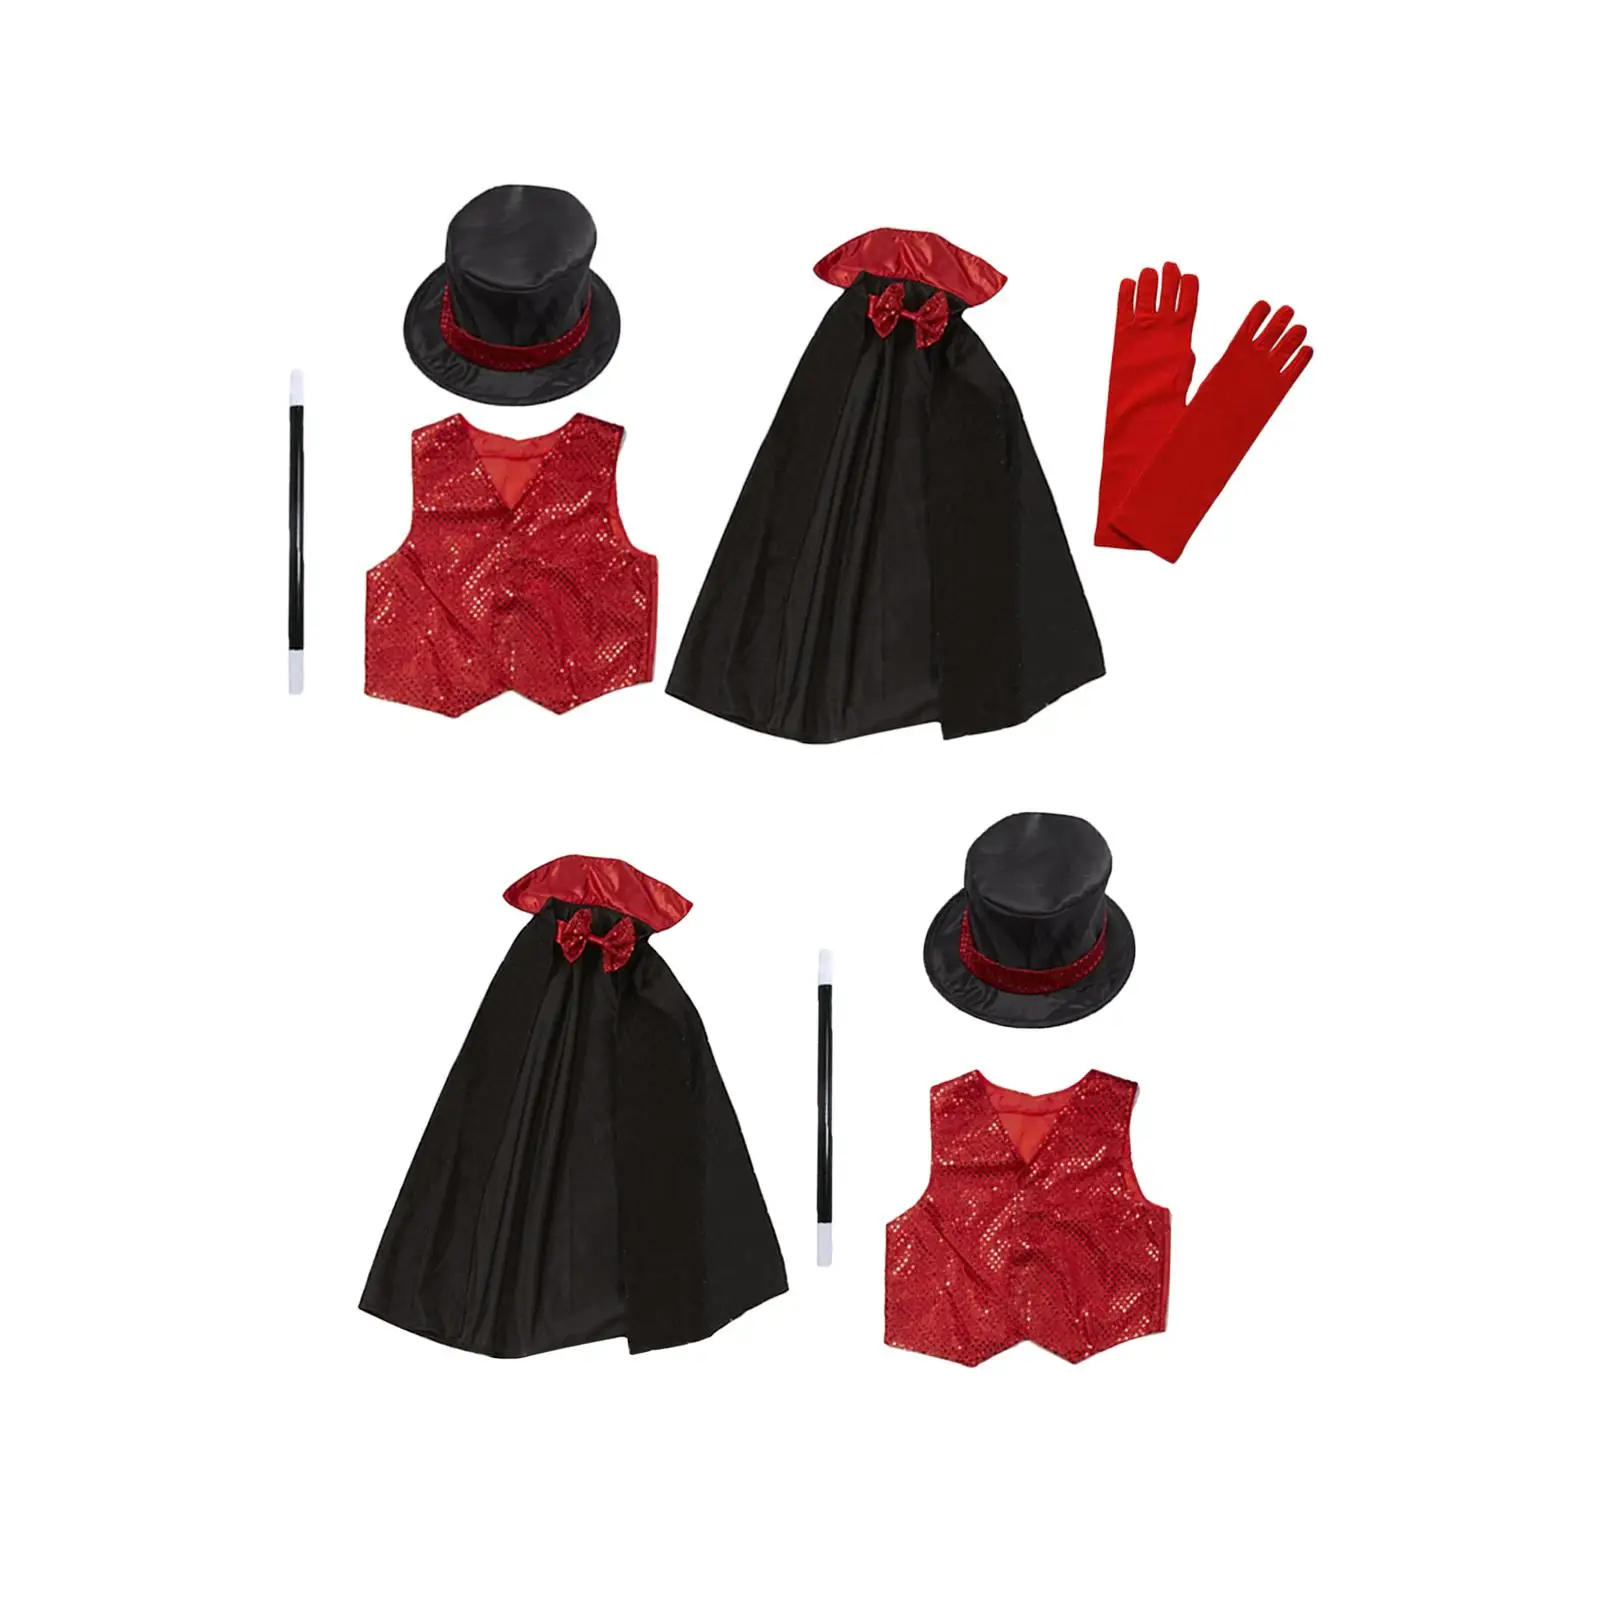 Magician Role party Cloak Cosplay Costume Dance Costume Set Stage Performance Magician Accessory Set for Christmas Kids